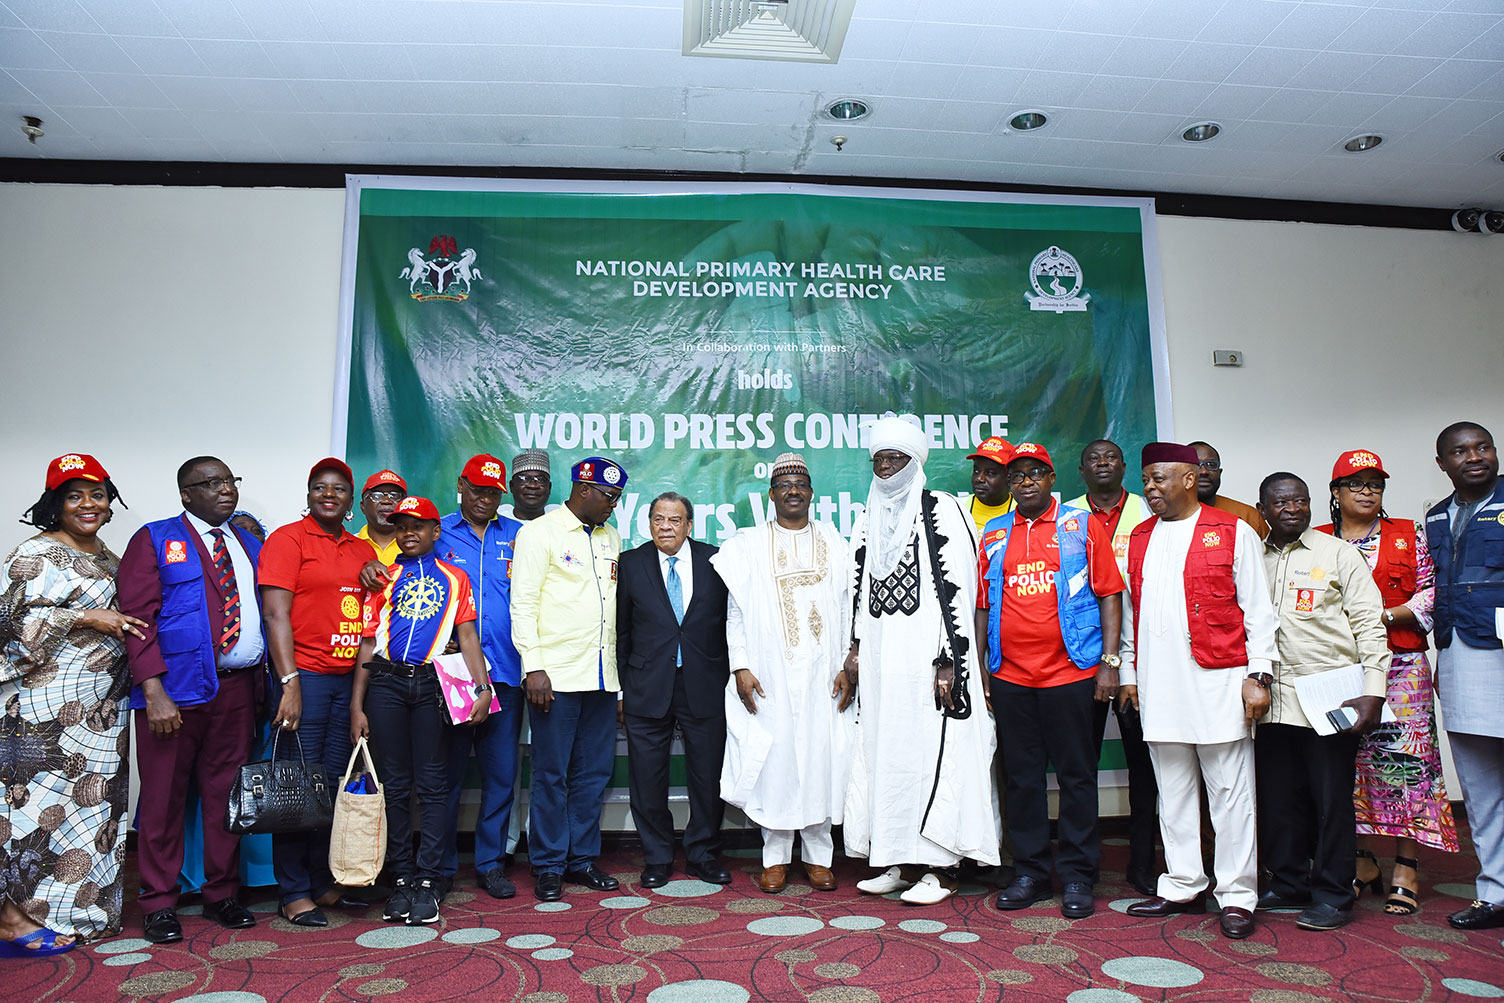 Sir Emeka Offor Foundation Joins Rotary International to mark Nigeria’s three years without wild poliovirus